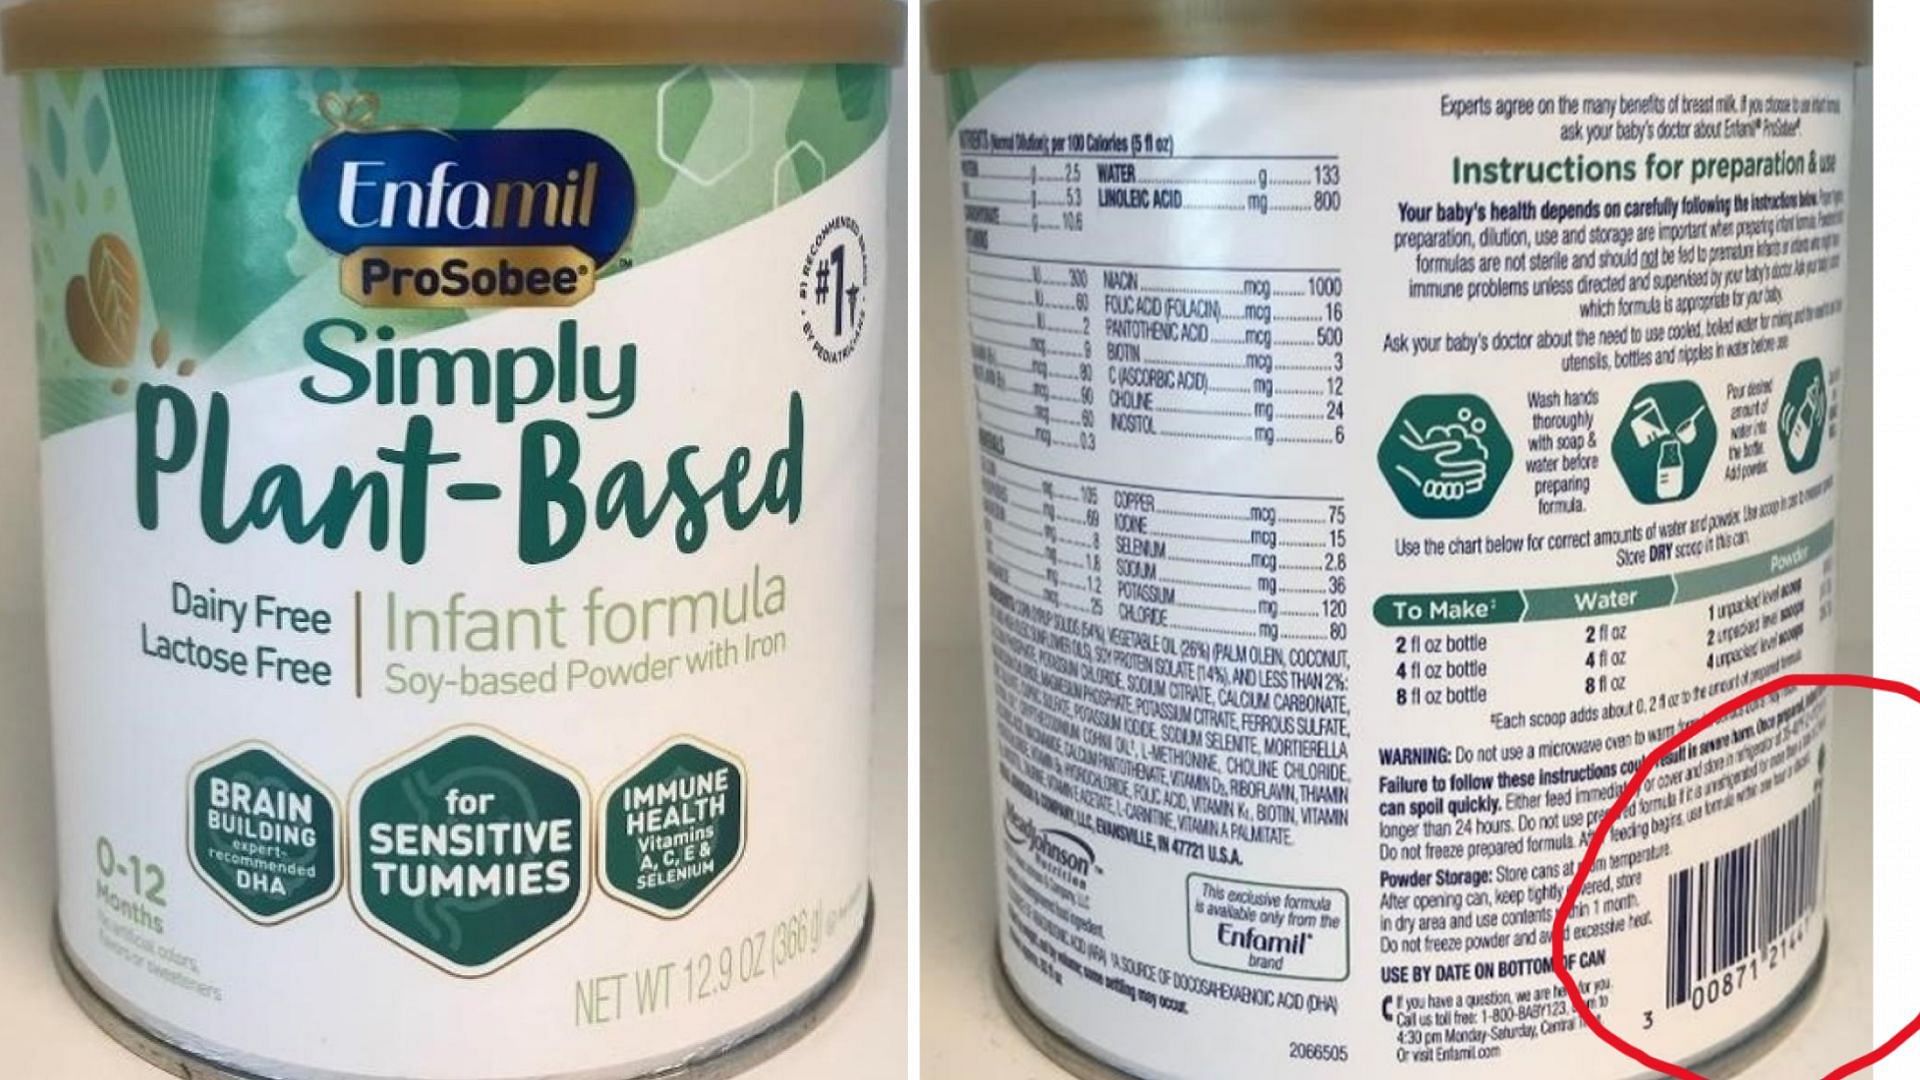 the front and back of the recalled Enfamil Prosobee 12.9 oz. Simply Plant-Based Infant Formula (Image via FDA)